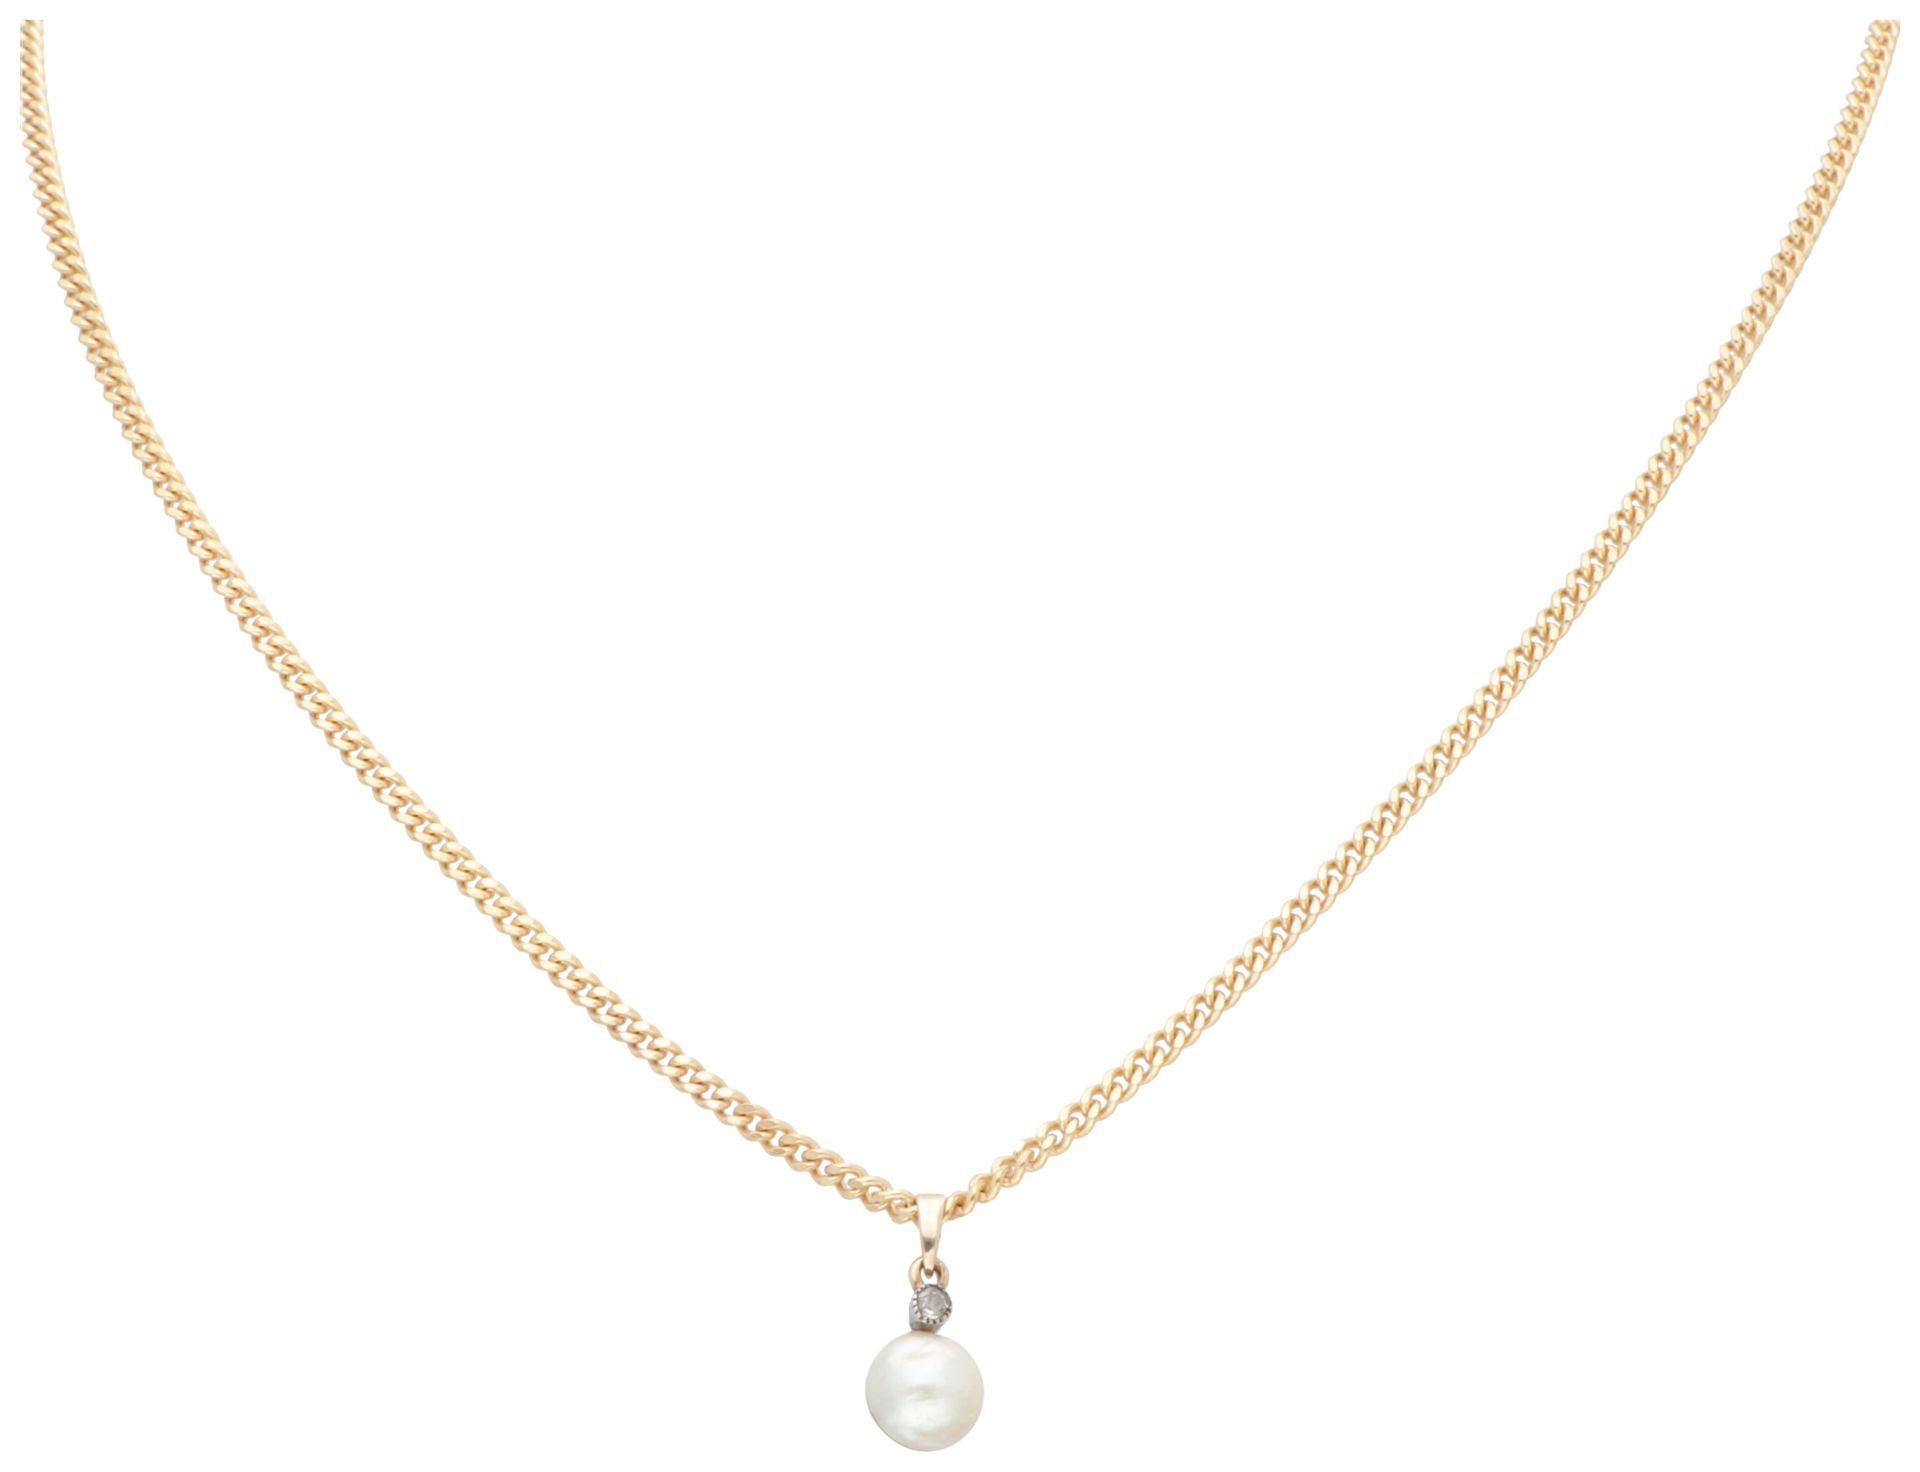 9K yellow gold gourmet necklace with half pearl and diamond pendant.